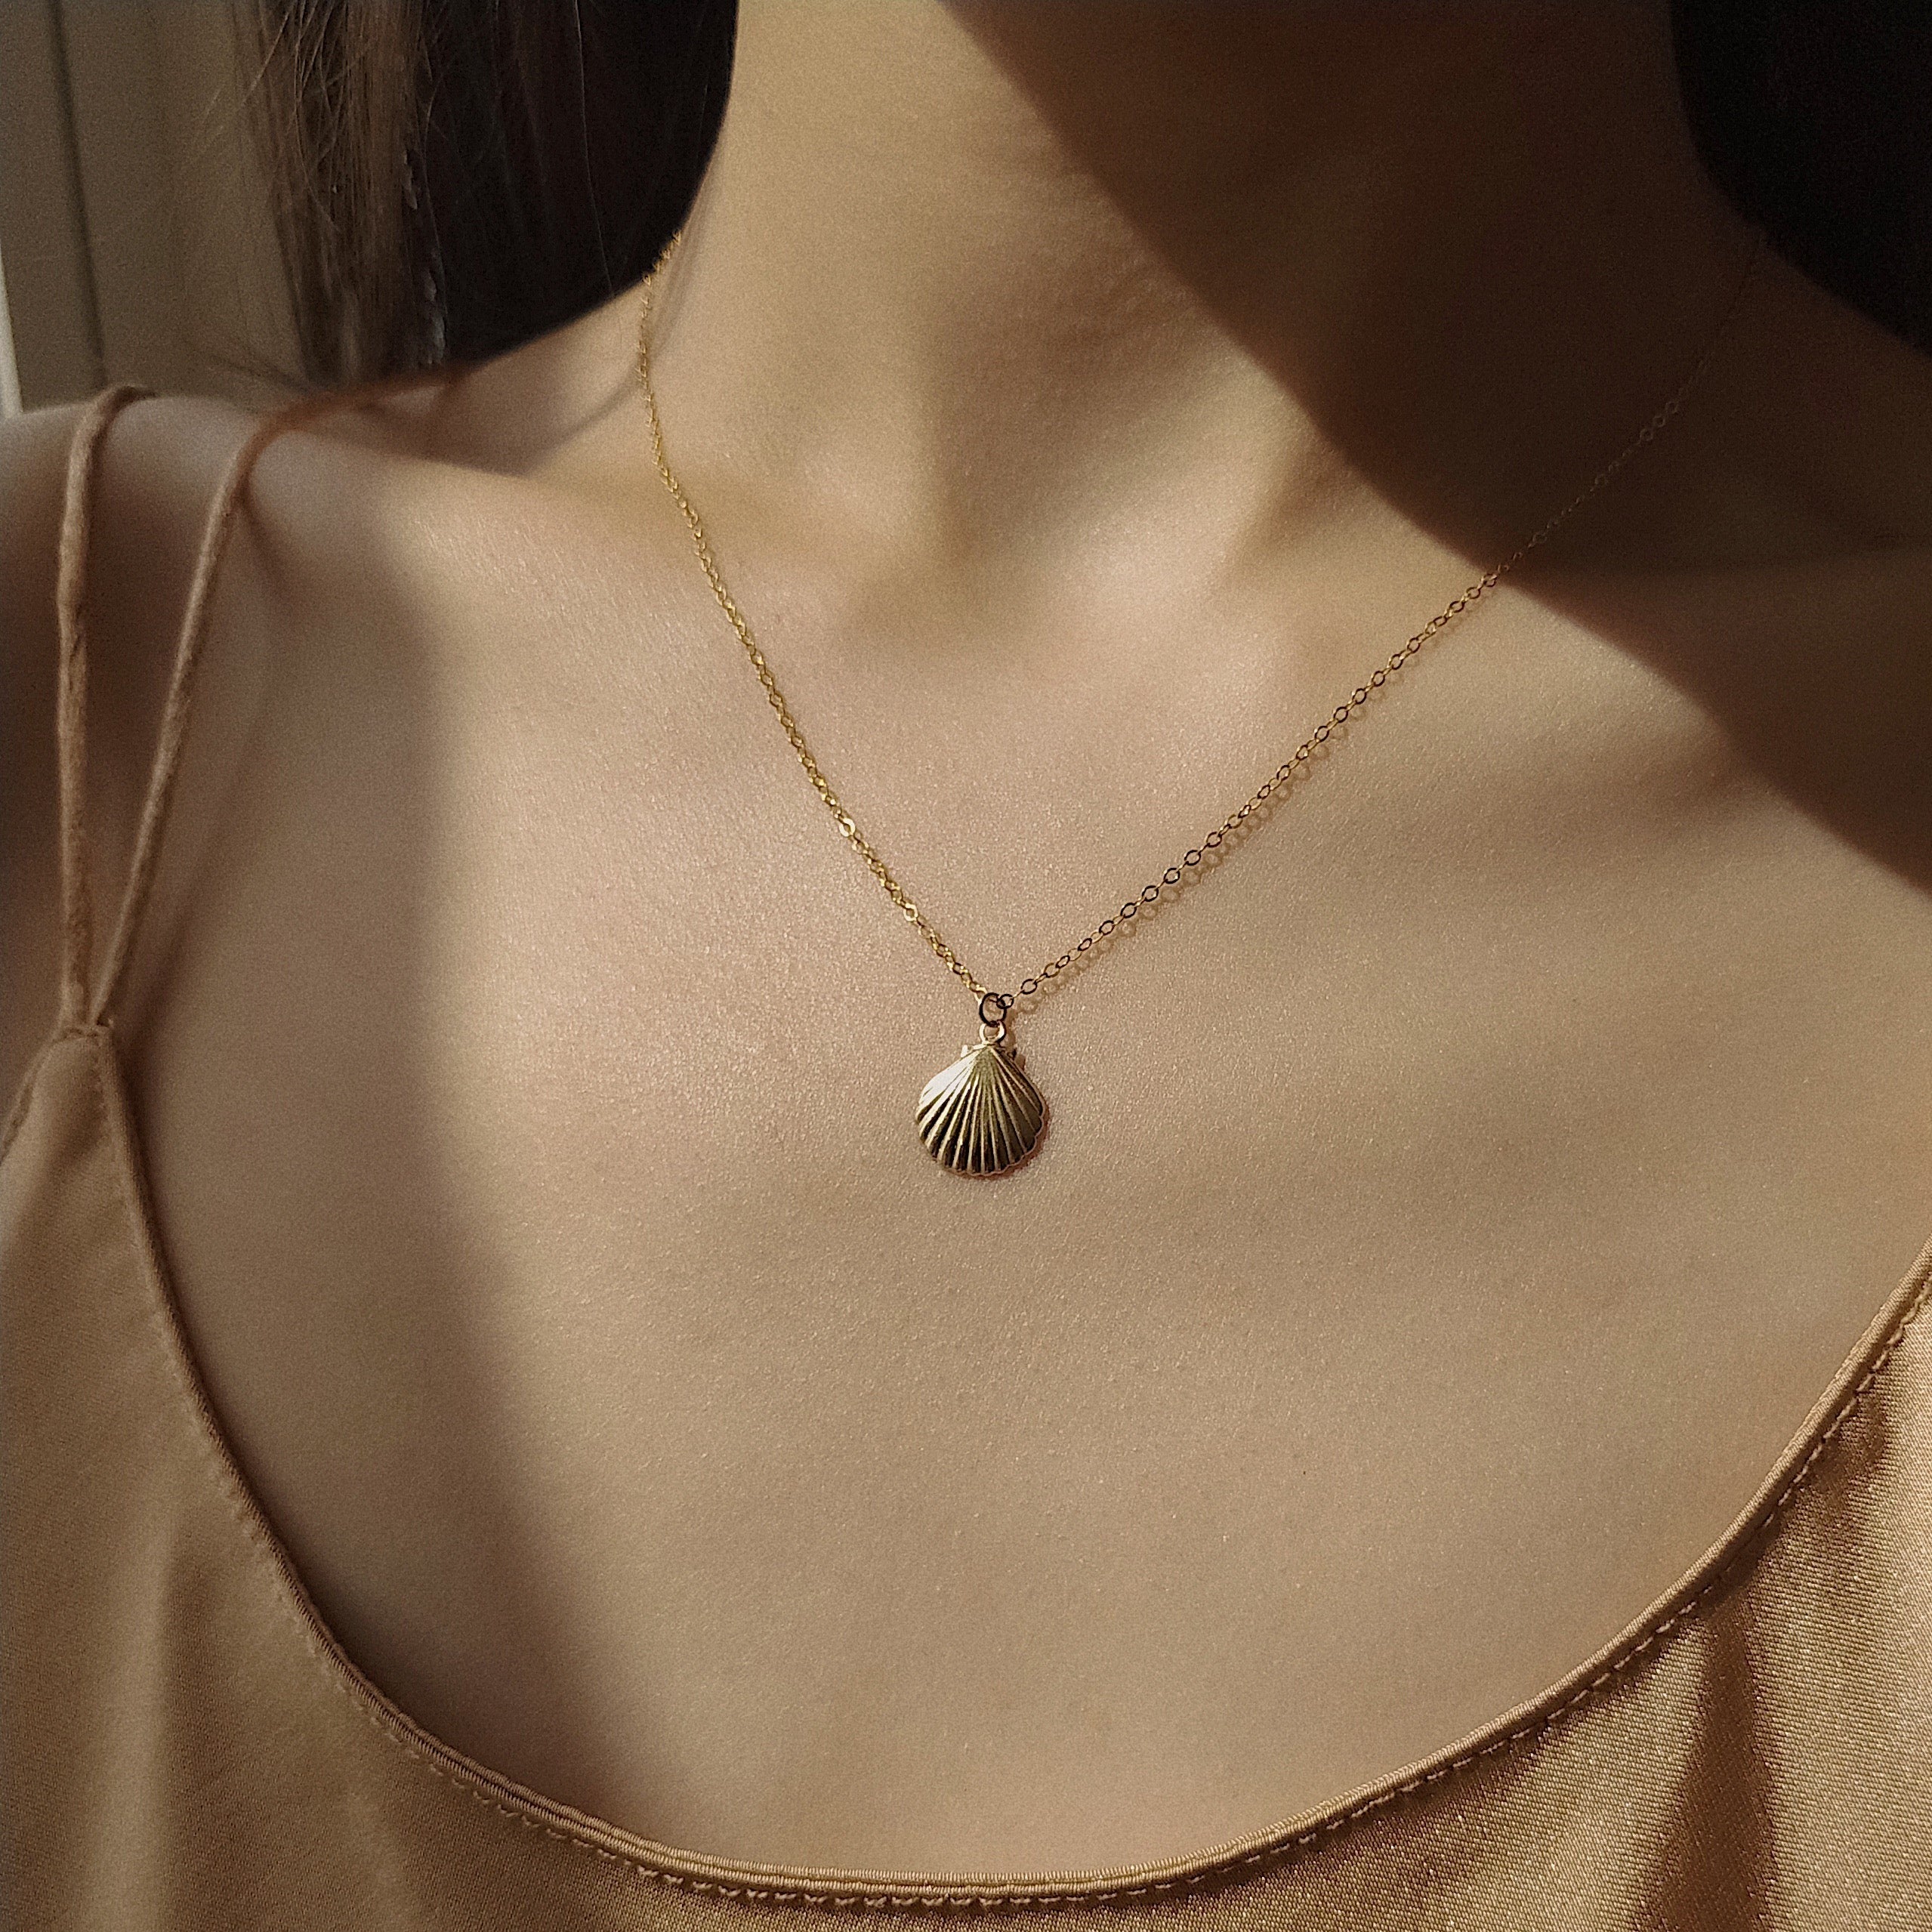 Shell Necklace 14k Gold Covered Fan-Shaped Anti-Allergy Necklace